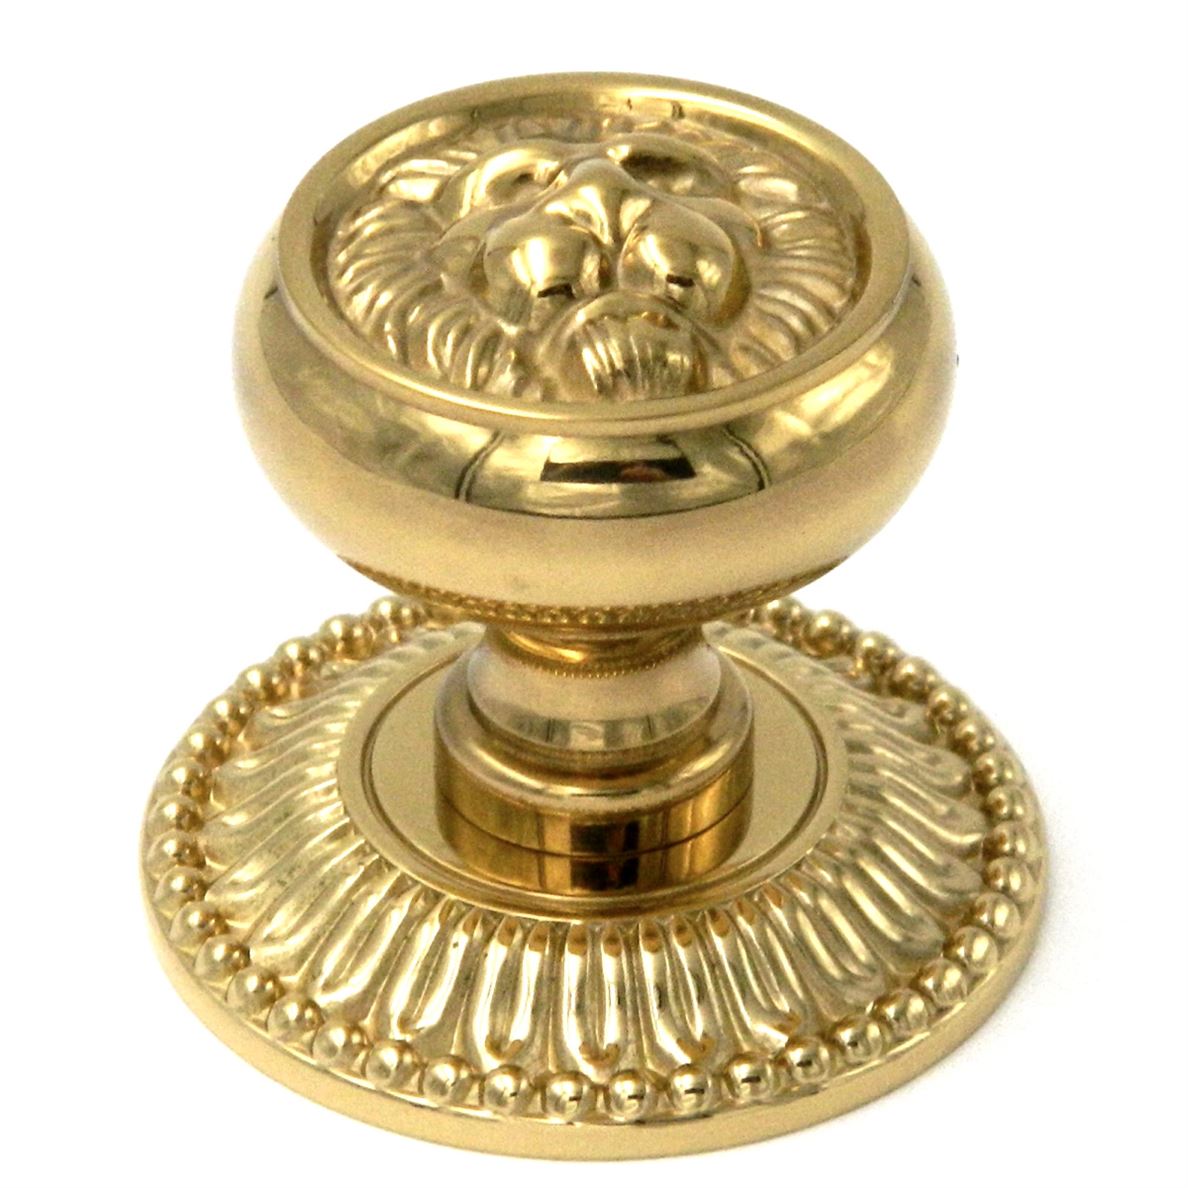 Belwith Keeler Polished Brass 1 5/8" Solid Brass Cabinet Knob Pull Backplate F4